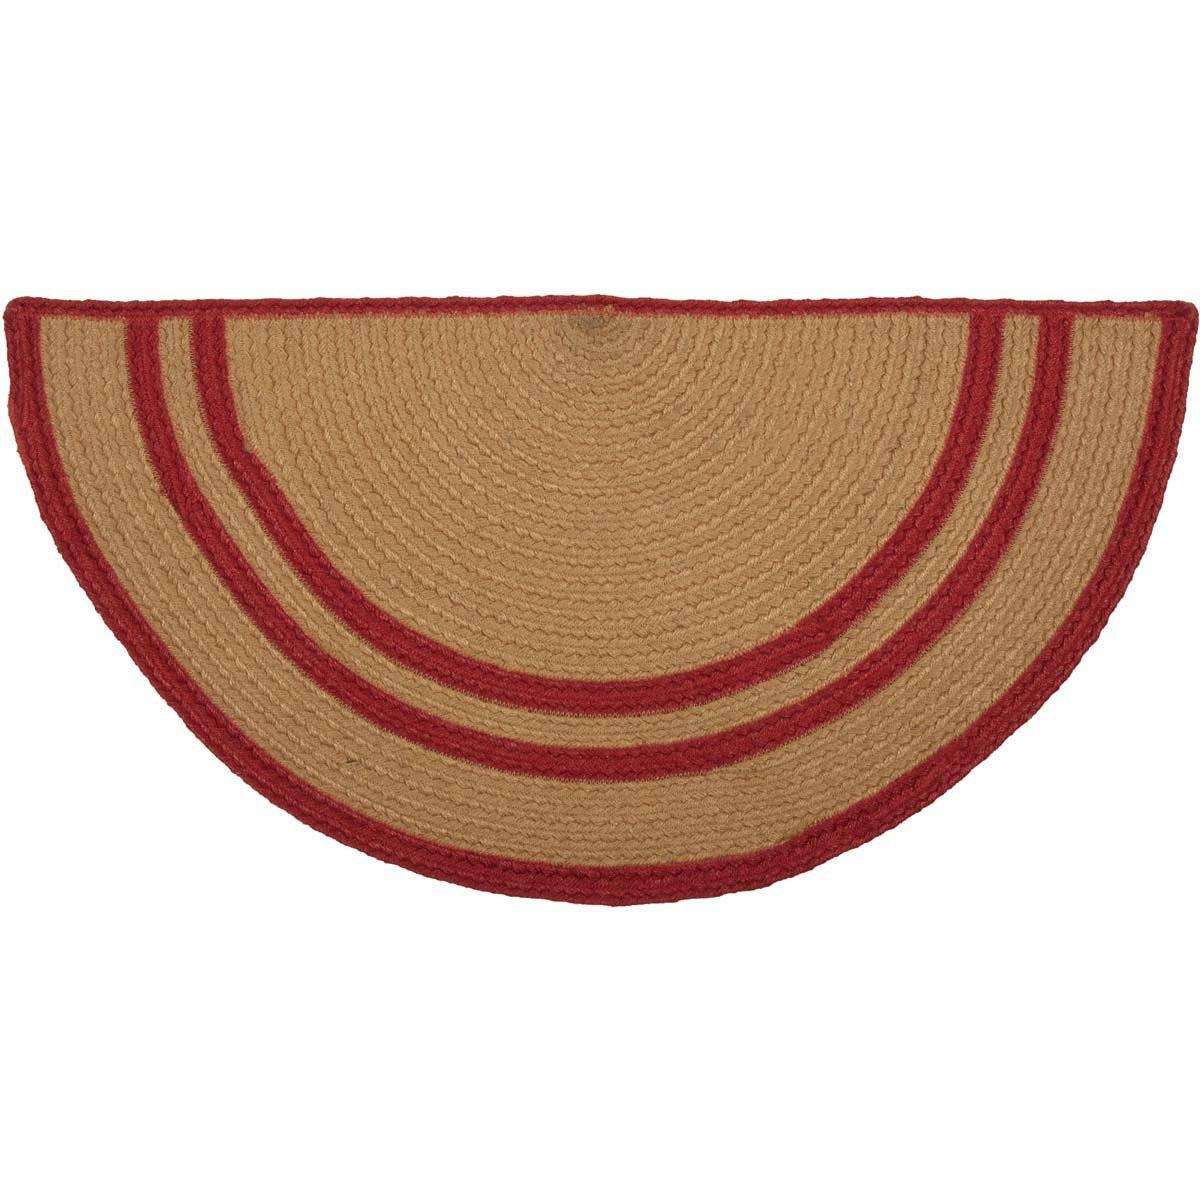 Liberty Stars Flag Jute Braided Rugs Oval/Half Circle VHC Brands rugs VHC Brands 